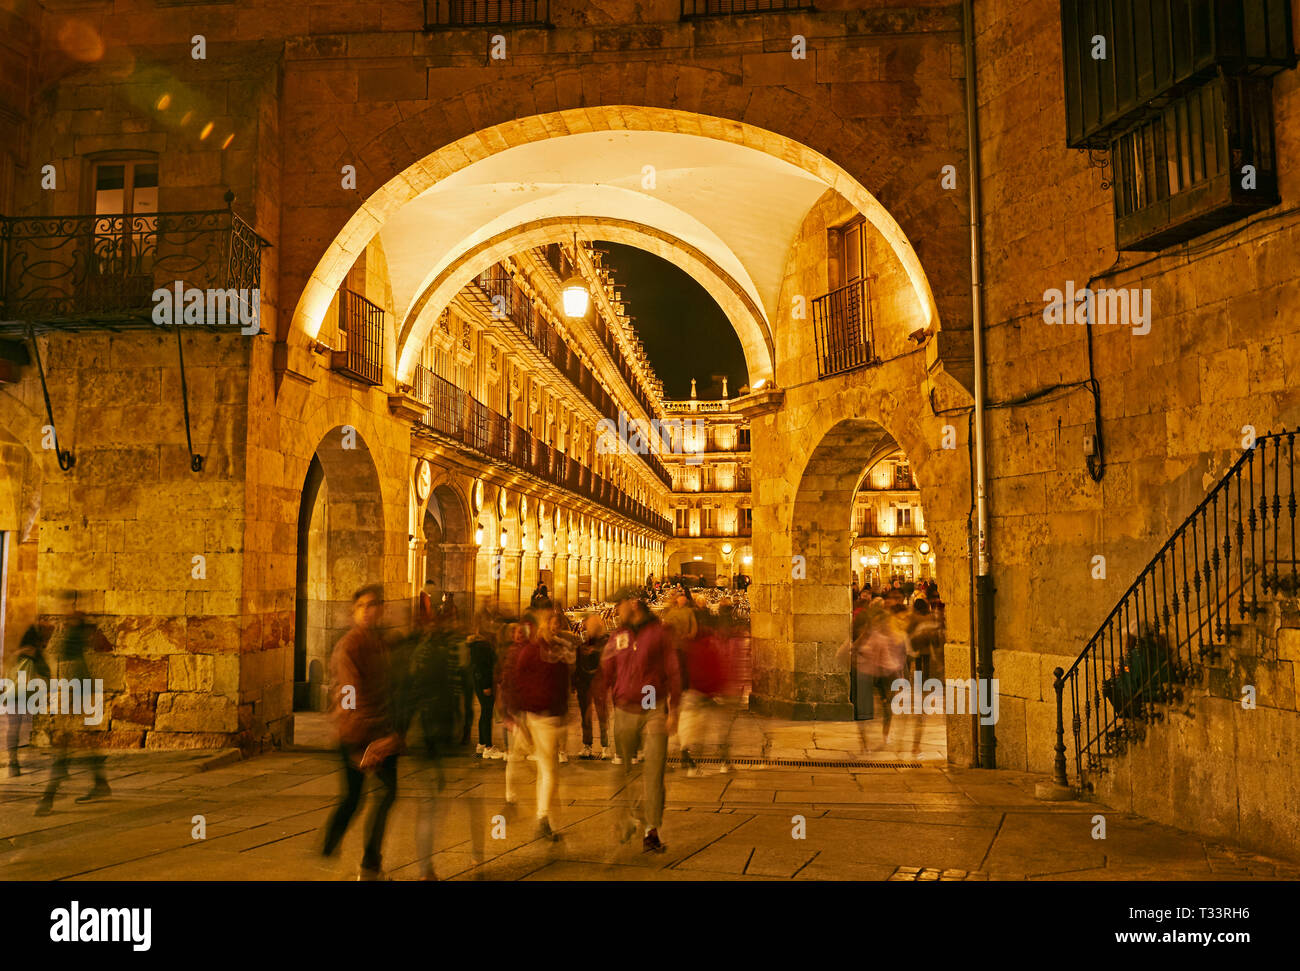 Architectural detail of the historic Plaza Mayor in Salamanca, Spain Stock Photo